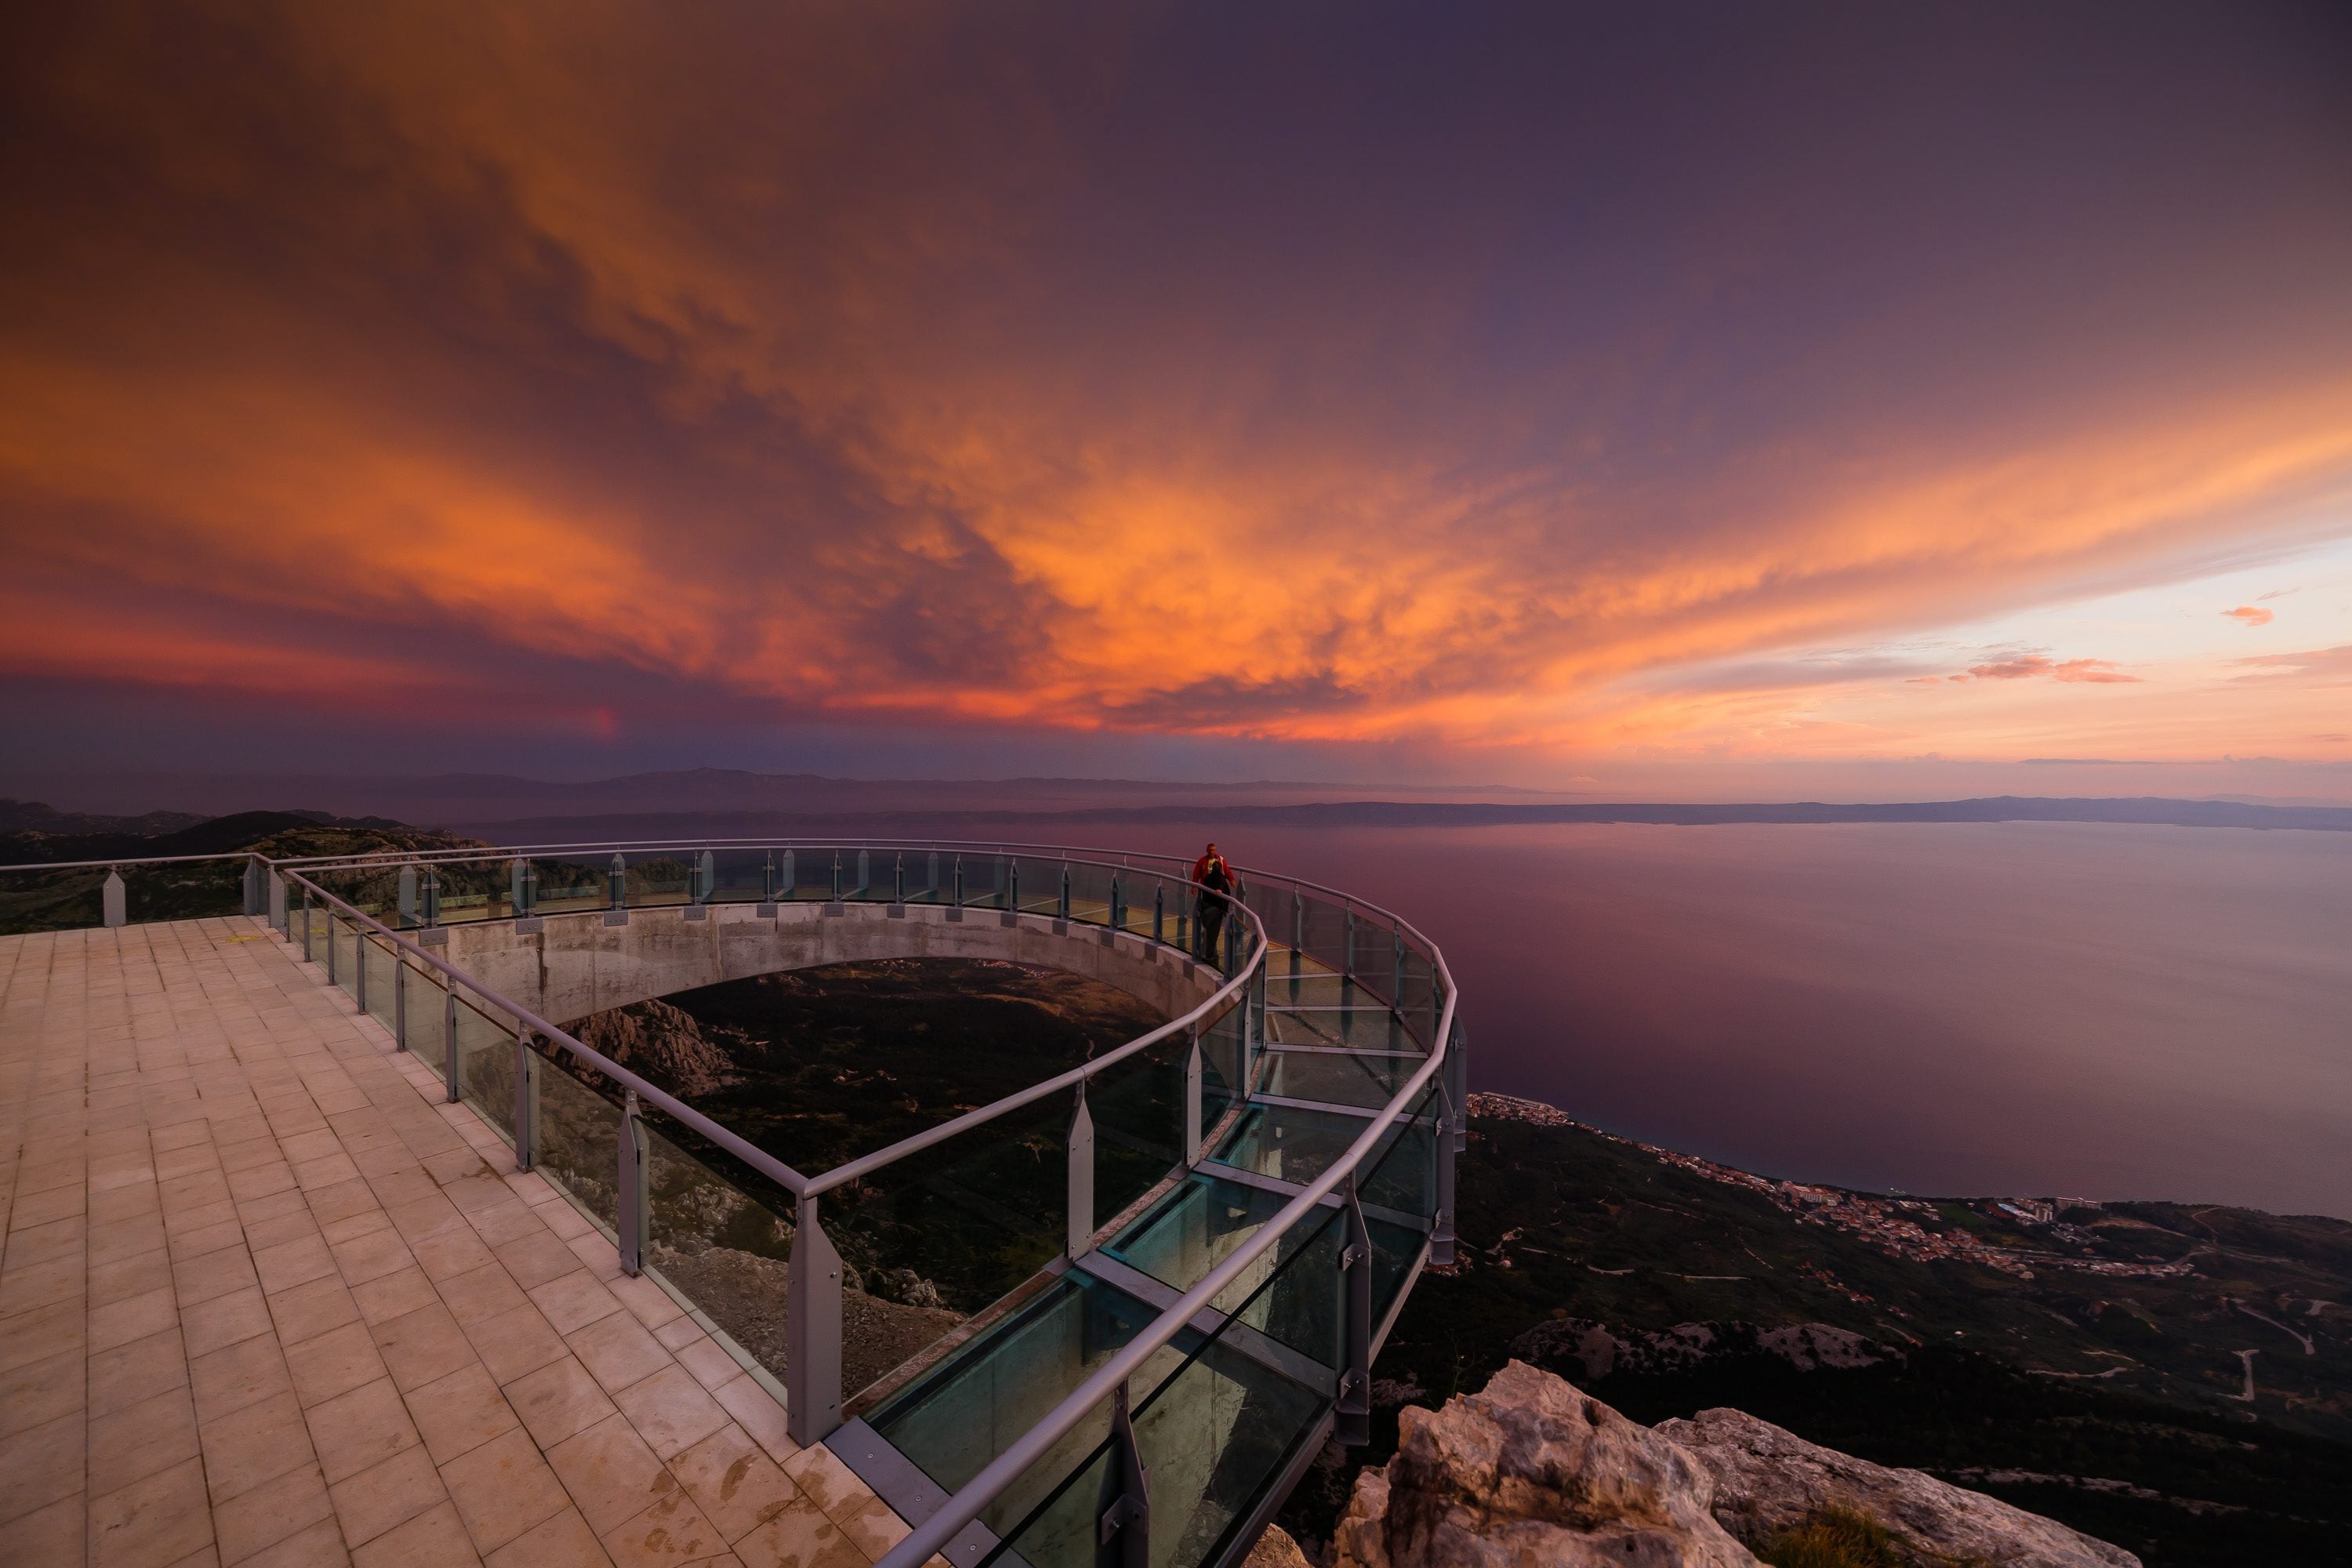 Skywalk Biokovo is an observation deck on the way to Sveti Jure with a glass floor 1,228m above sea level and more than a kilometre up in the air